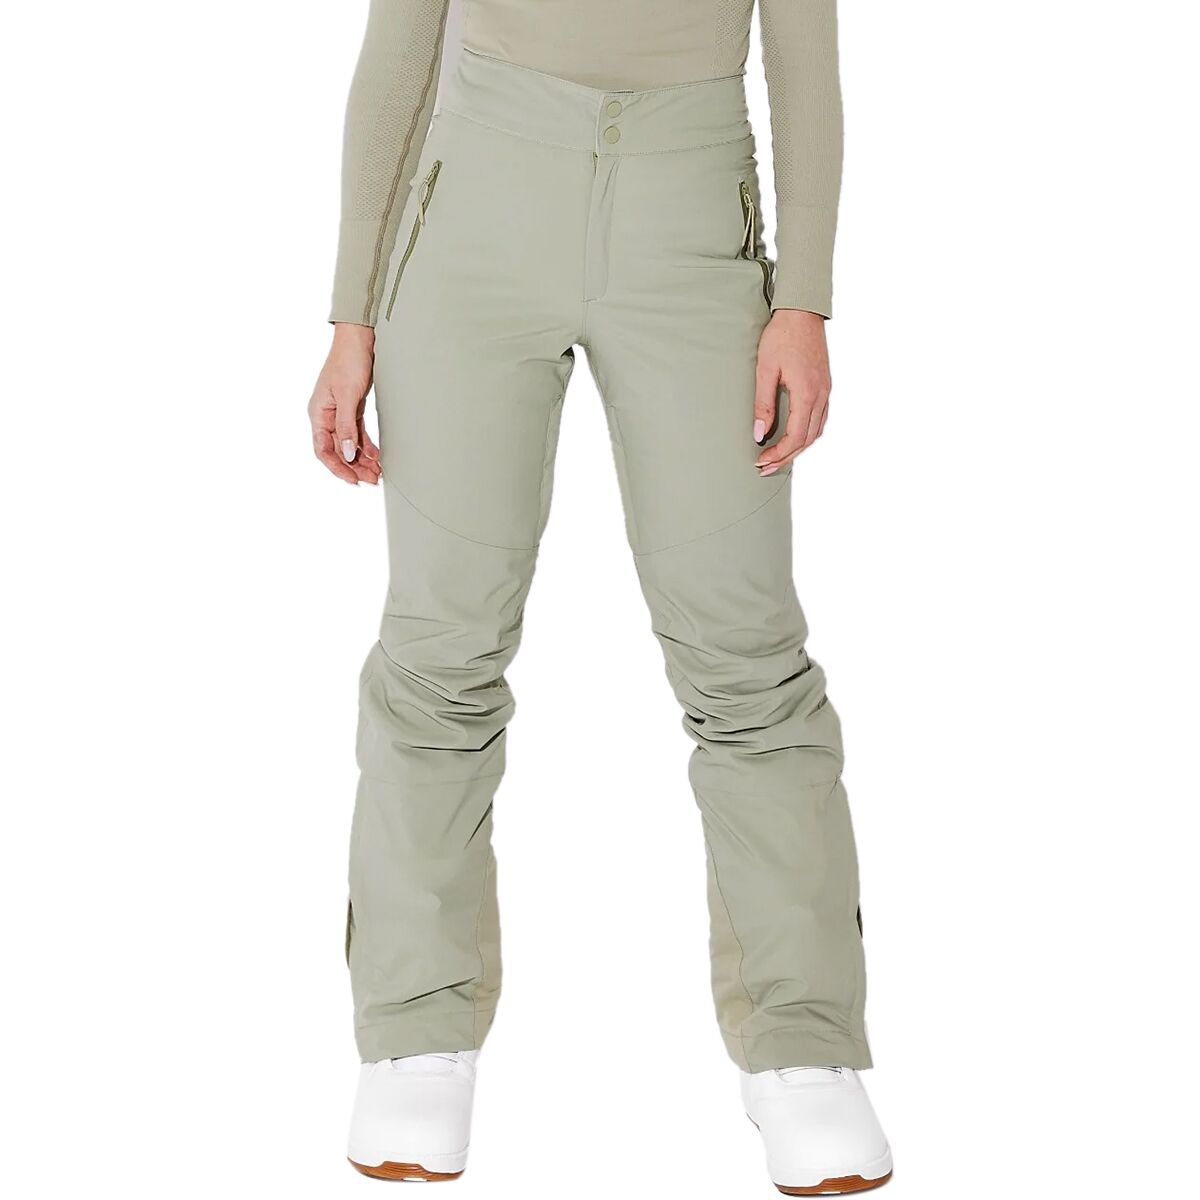 Halfdays Alessandra Insulated Water Resistant Ski Pants In Flame